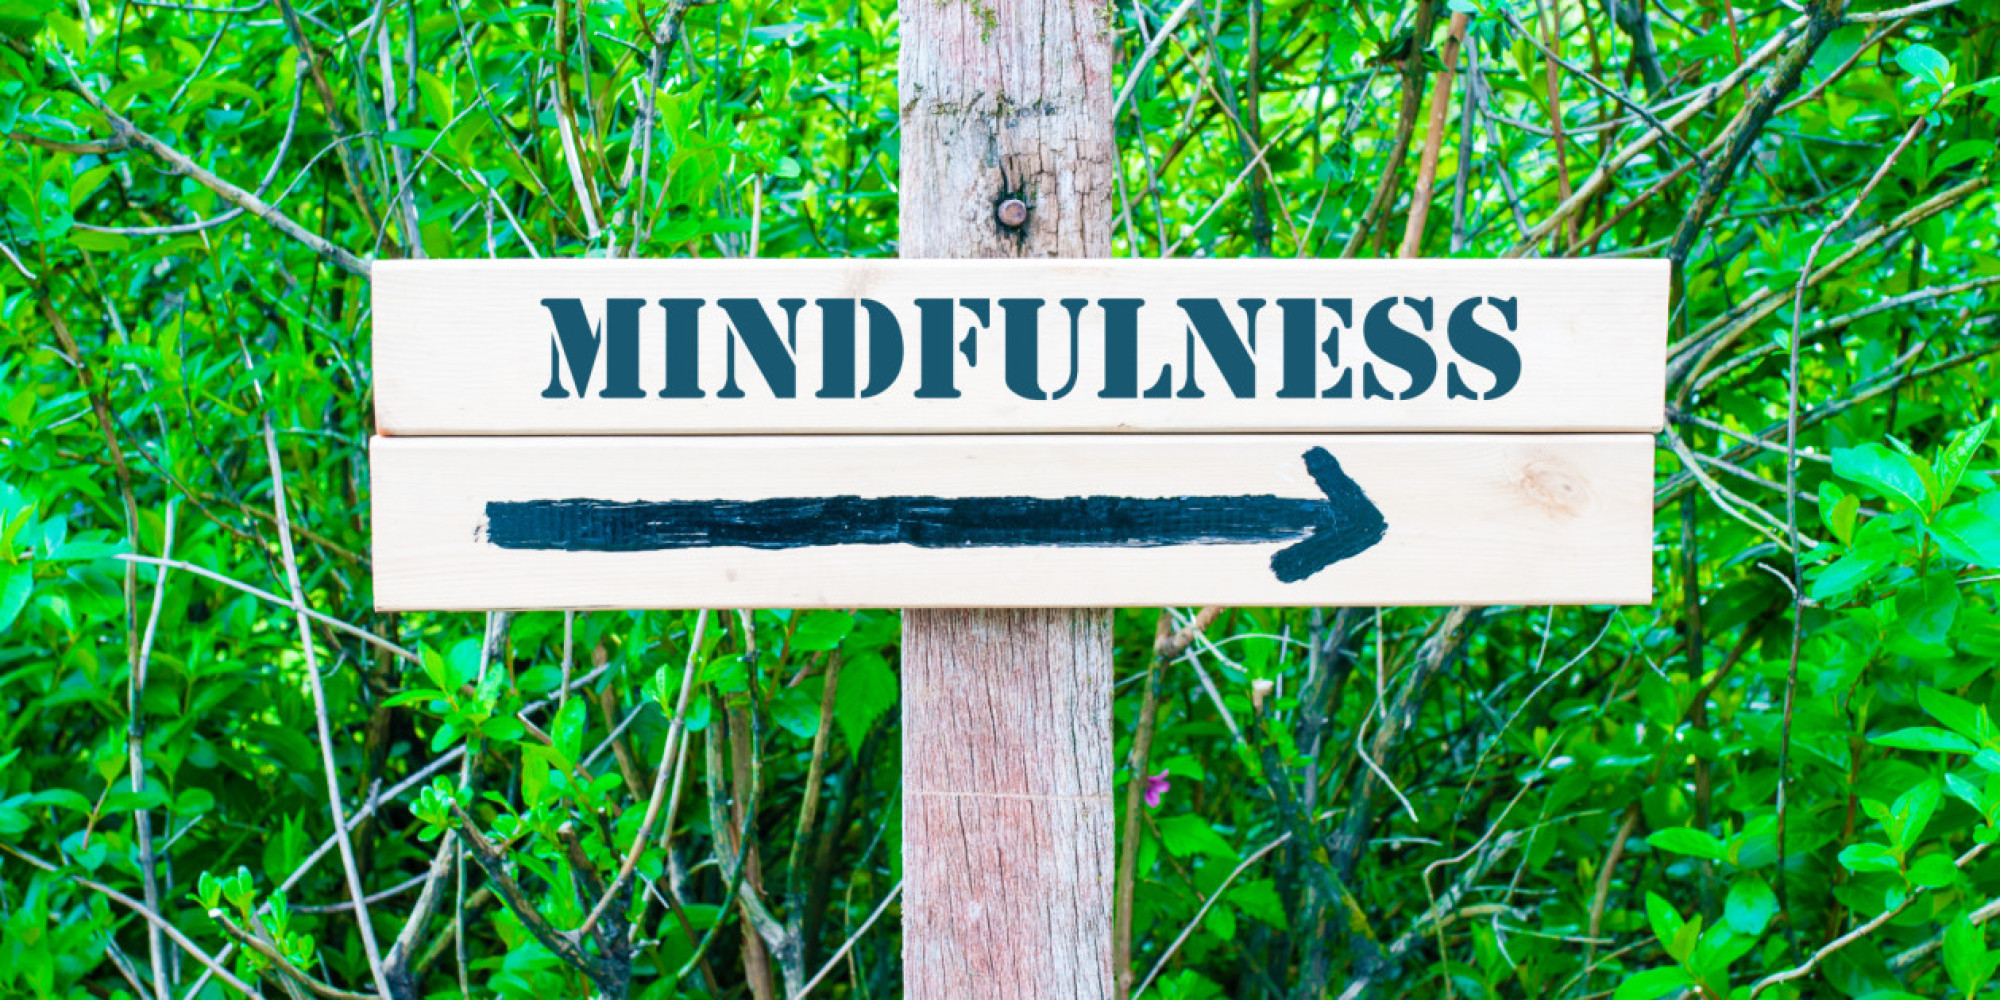 100 Mindfulness Meditations Book Review - Huffington Post